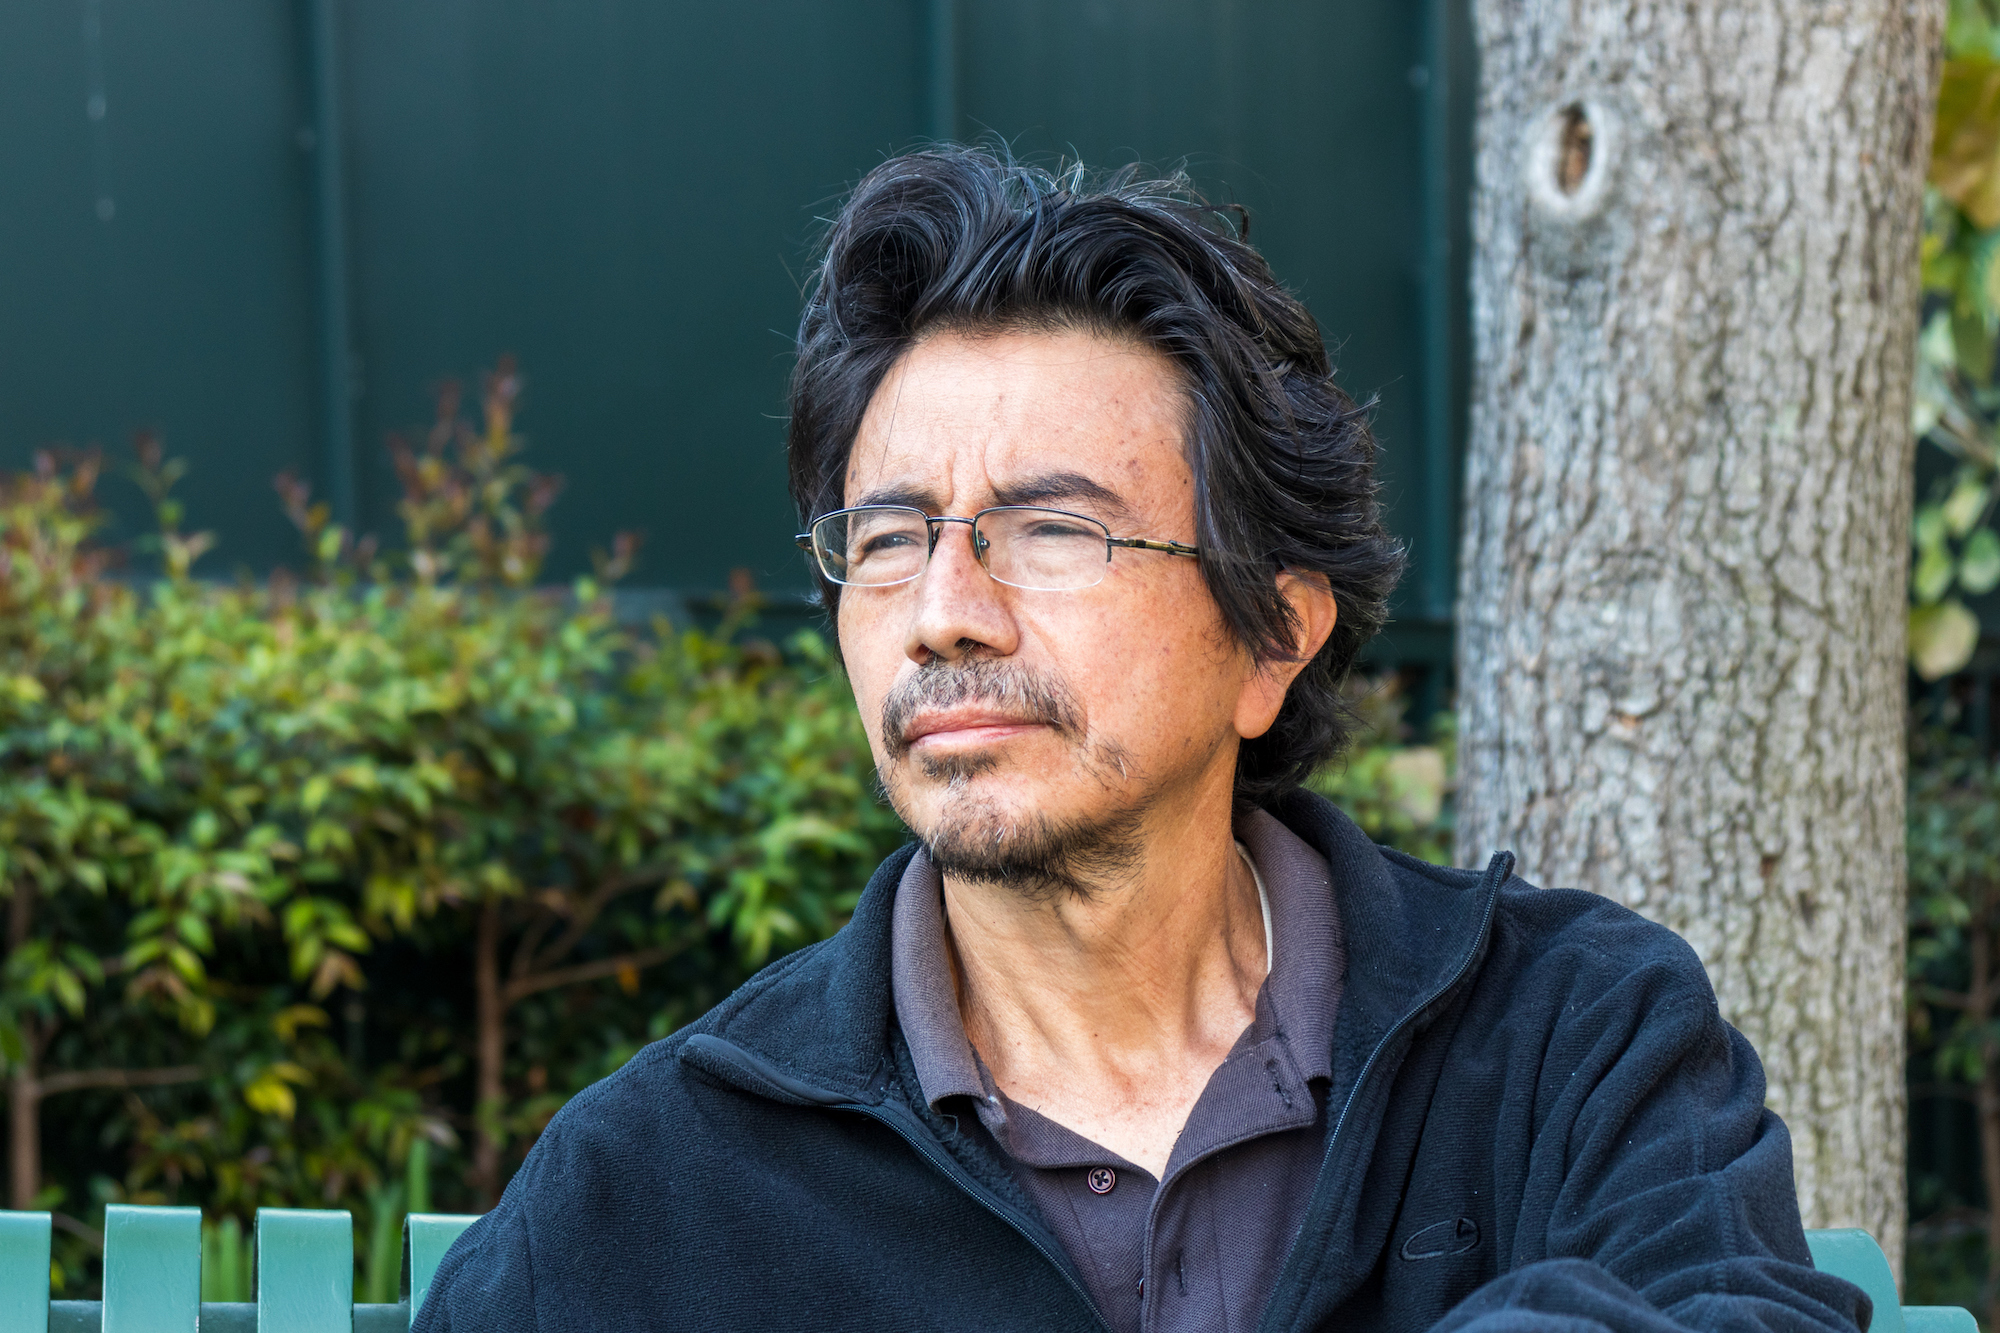 Senior Latino man with glasses and thick dark hair sits outside at a park. He squints, straining to see something in the distance.